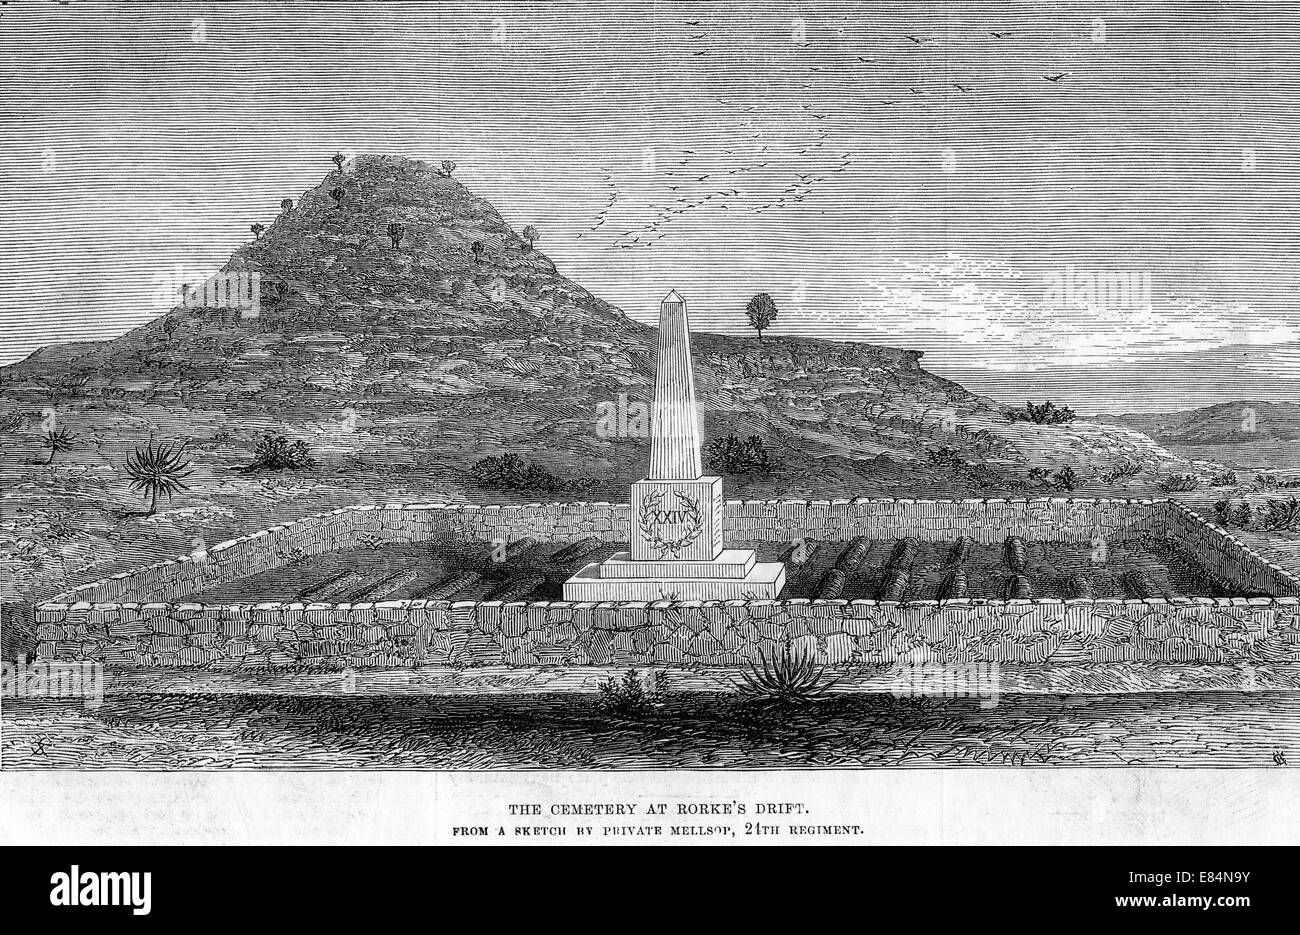 ZULU WAR 1879 Cemetery at Rorke's Drift as it appeared several months after the battle. The height of the hill is exaggerated. Stock Photo